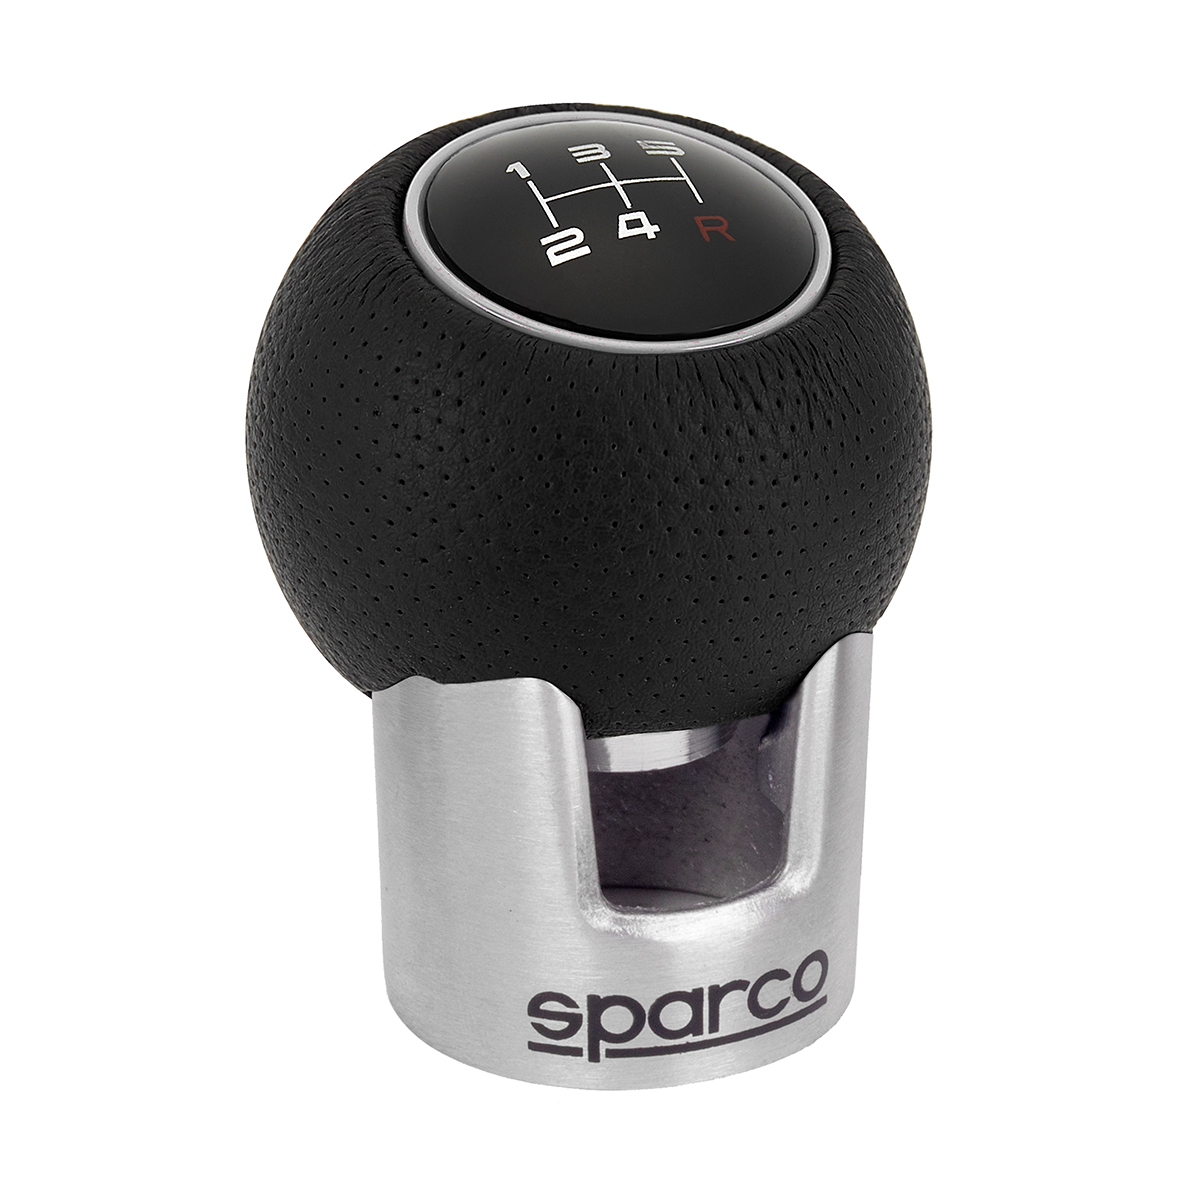 Sparco Handheld Slot Punch With Cushioned Grip, 6 mm, Silver/Black